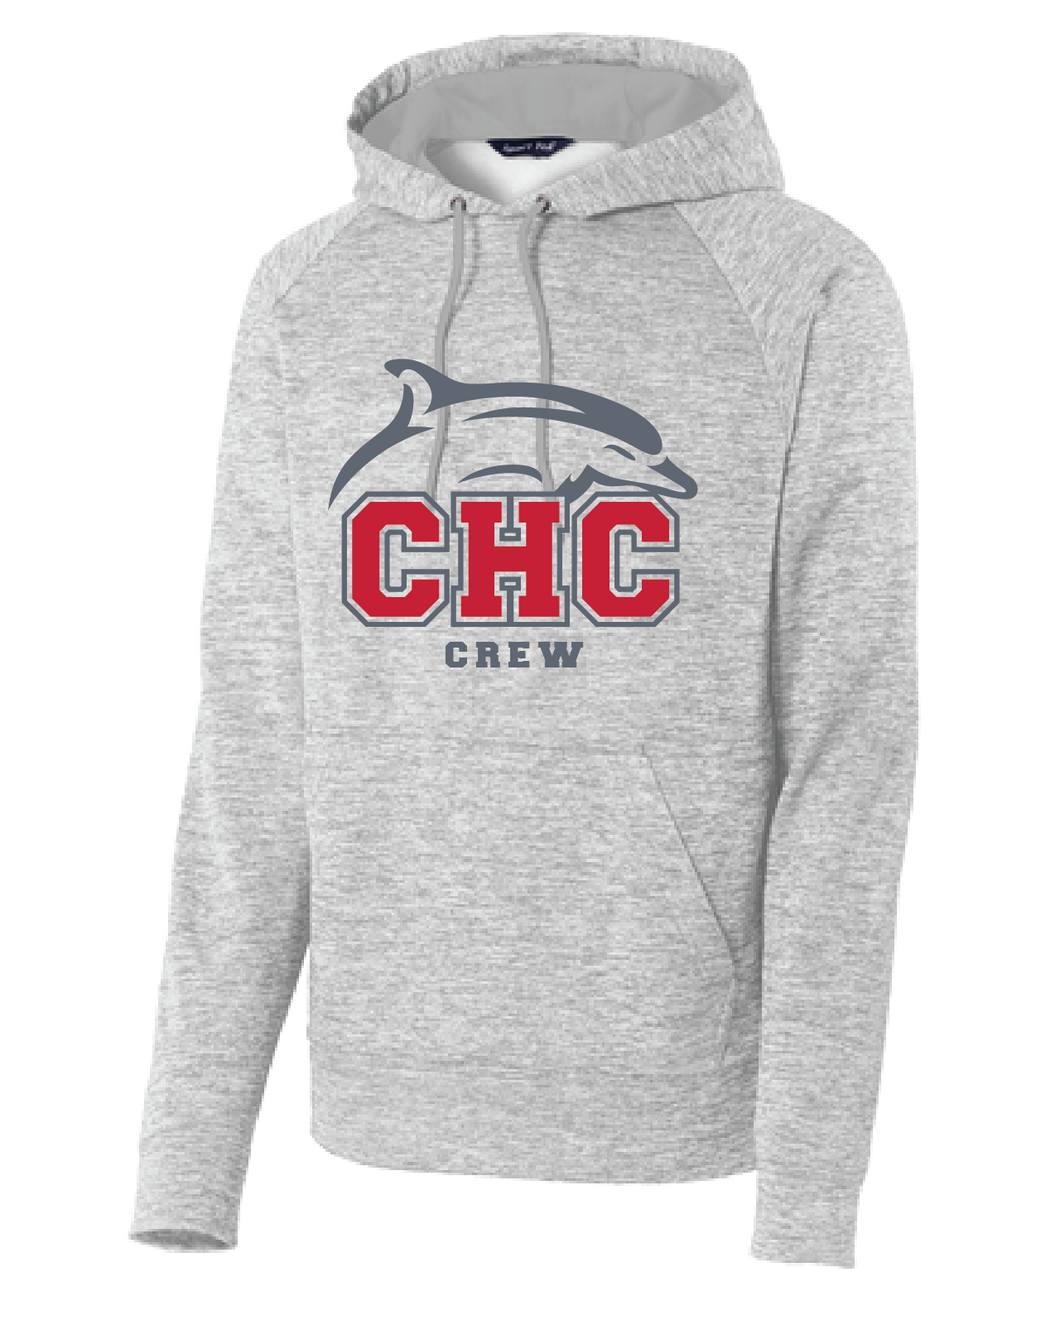 Electric Heather Fleece Hooded Pullover / Silver / Cape Henry Collegiate Crew